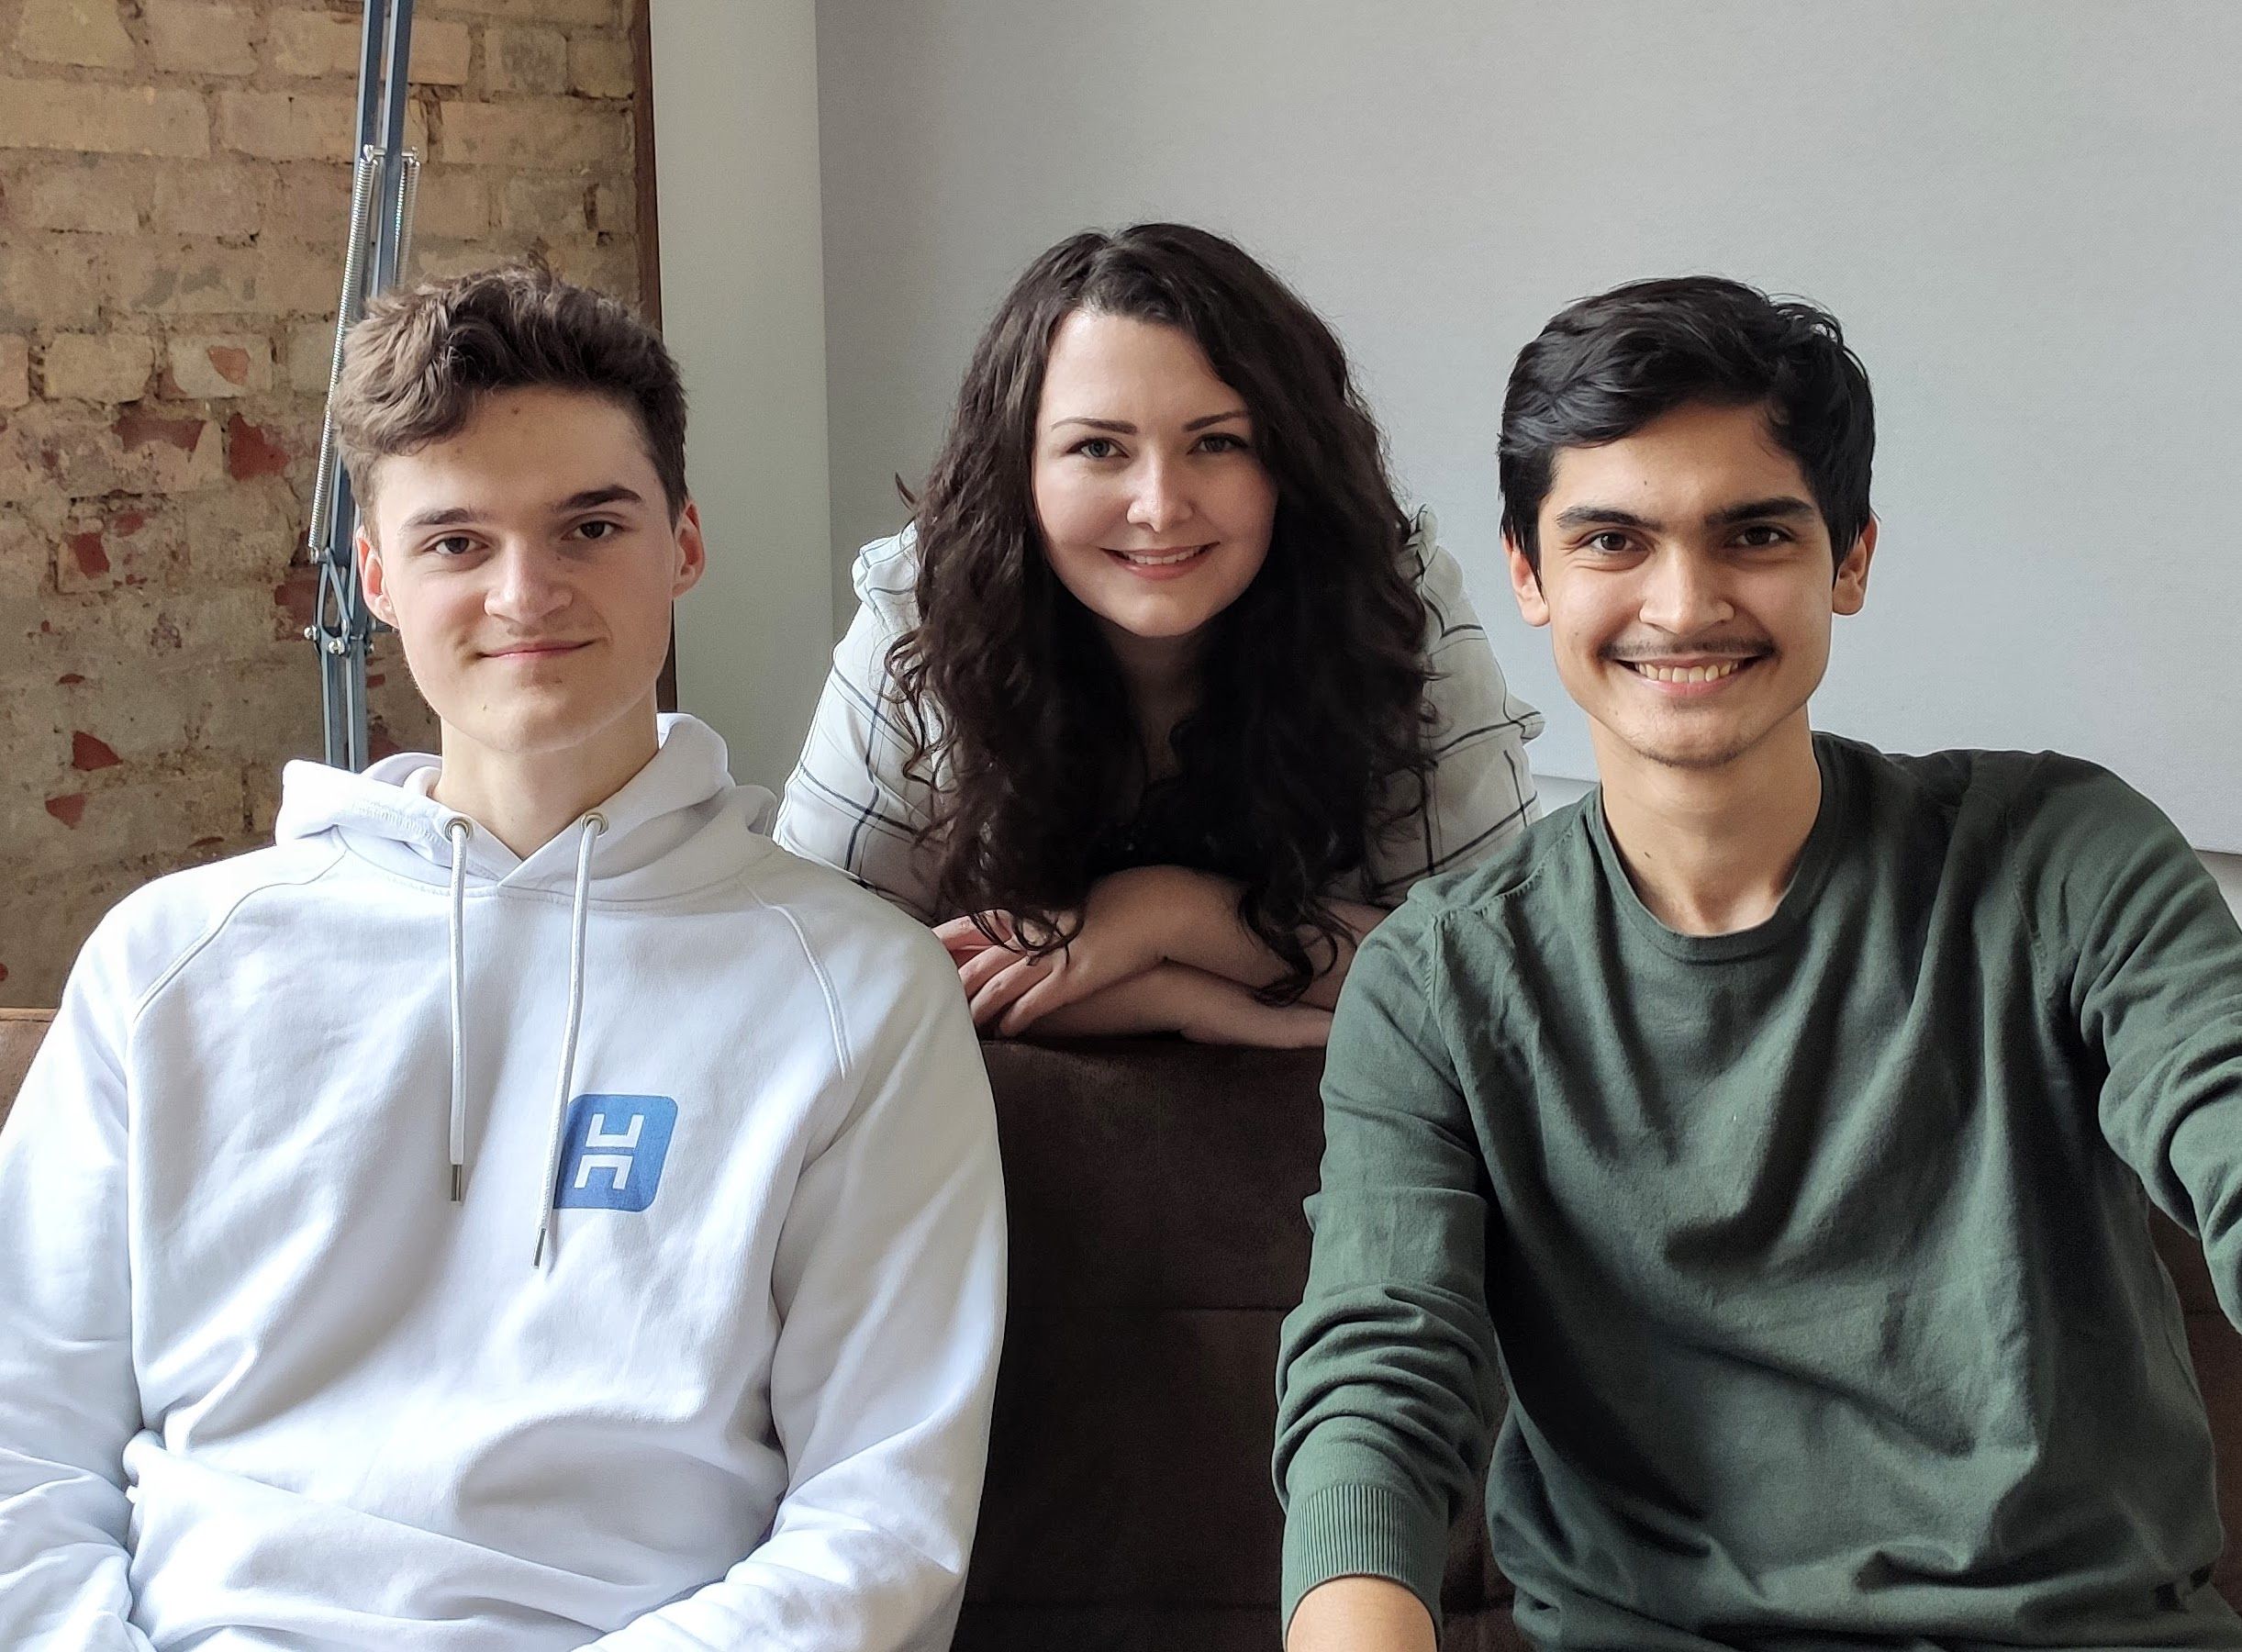 The Pockethost Founders, from left to right: Christian Orlowski, Theresa Neumann und Marco Salas Franz